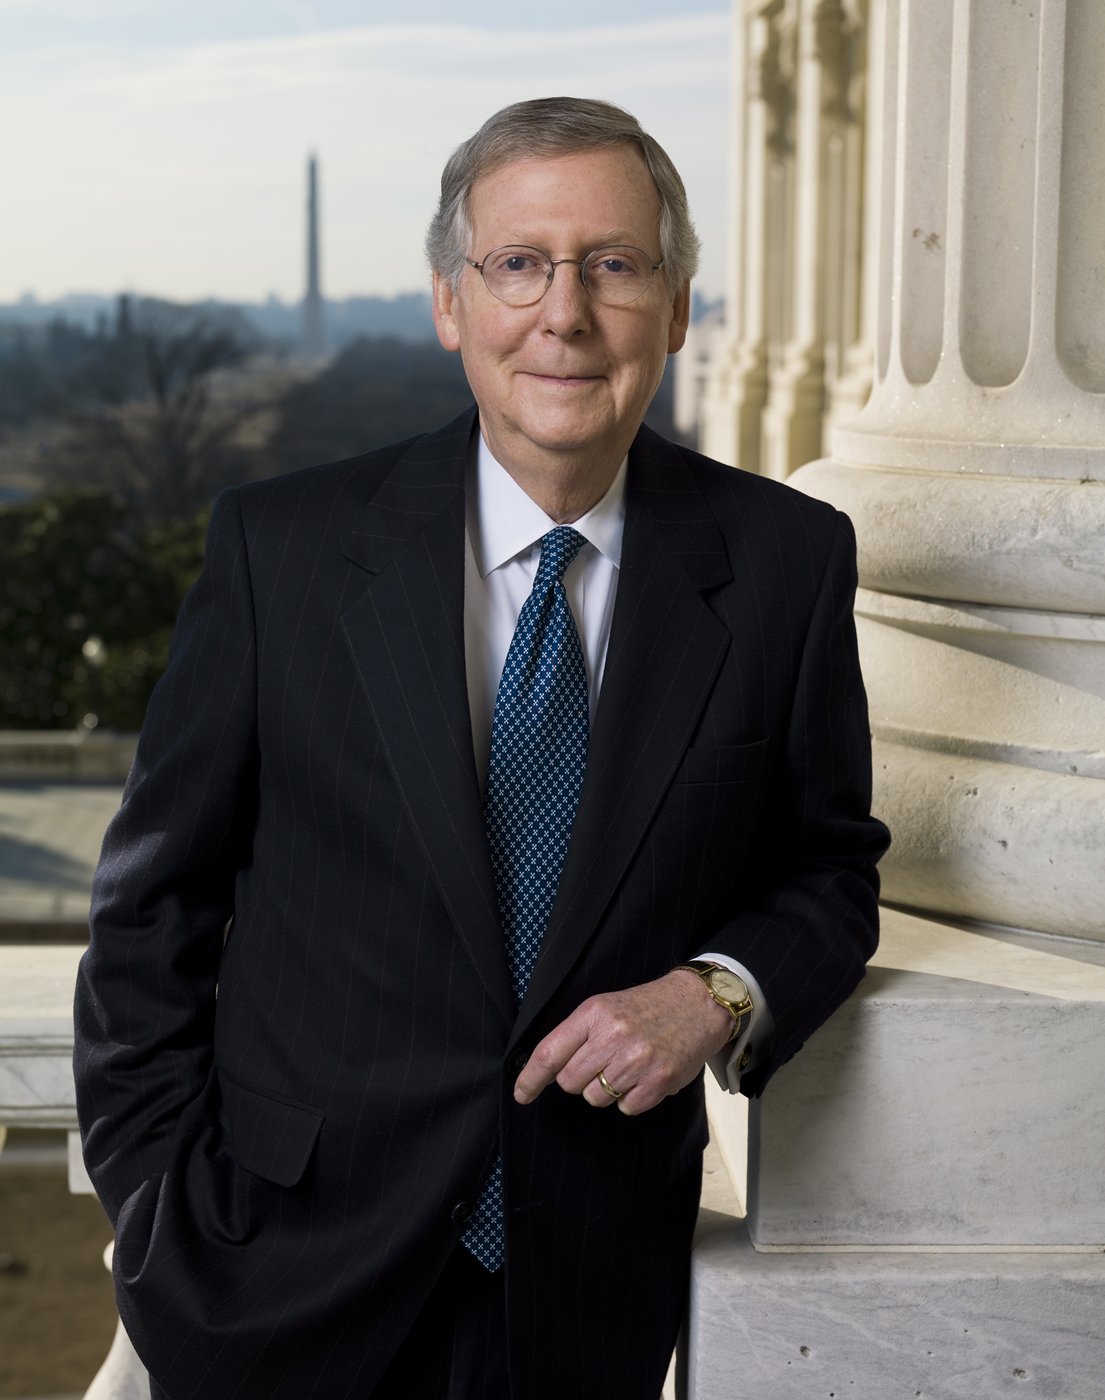 Sen. Mitch McConnell named one of the "Top Ten Most Intriguing Political Personalities of 2010" 